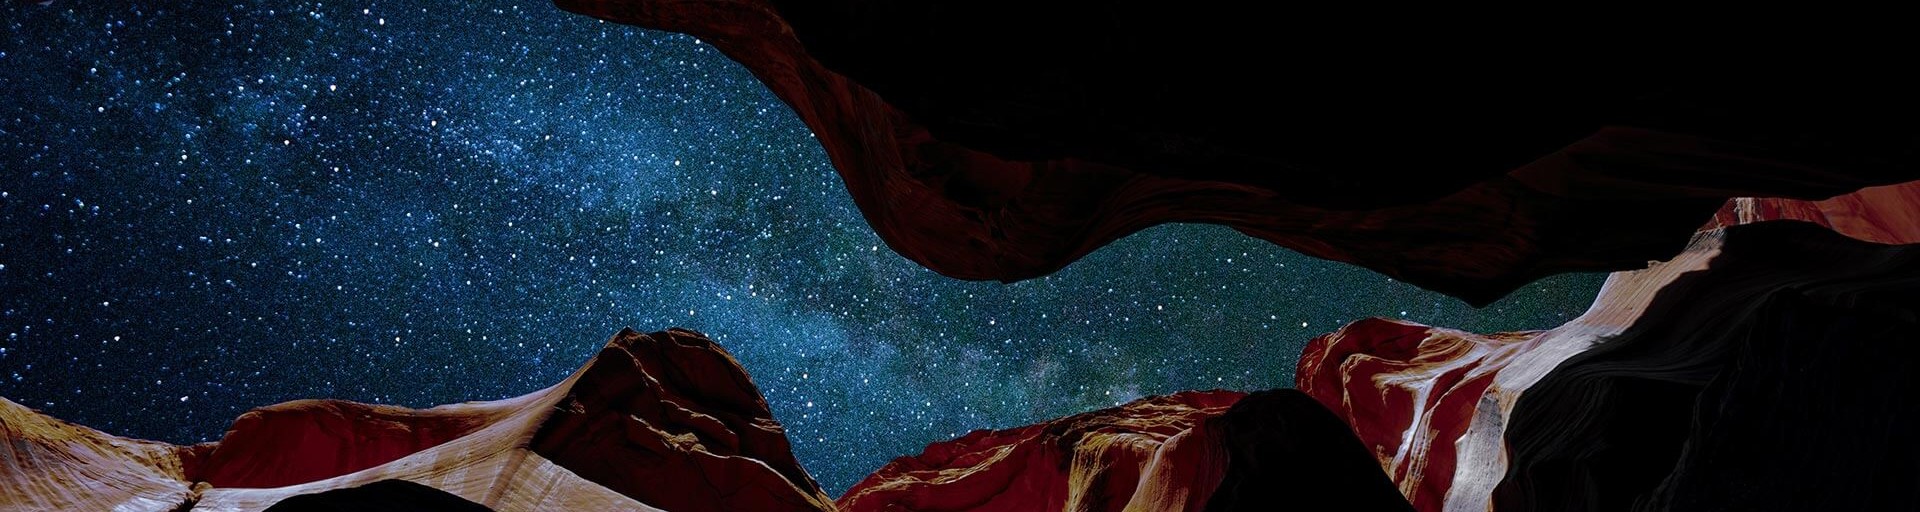 A view of a starry sky from inside a slot canyon